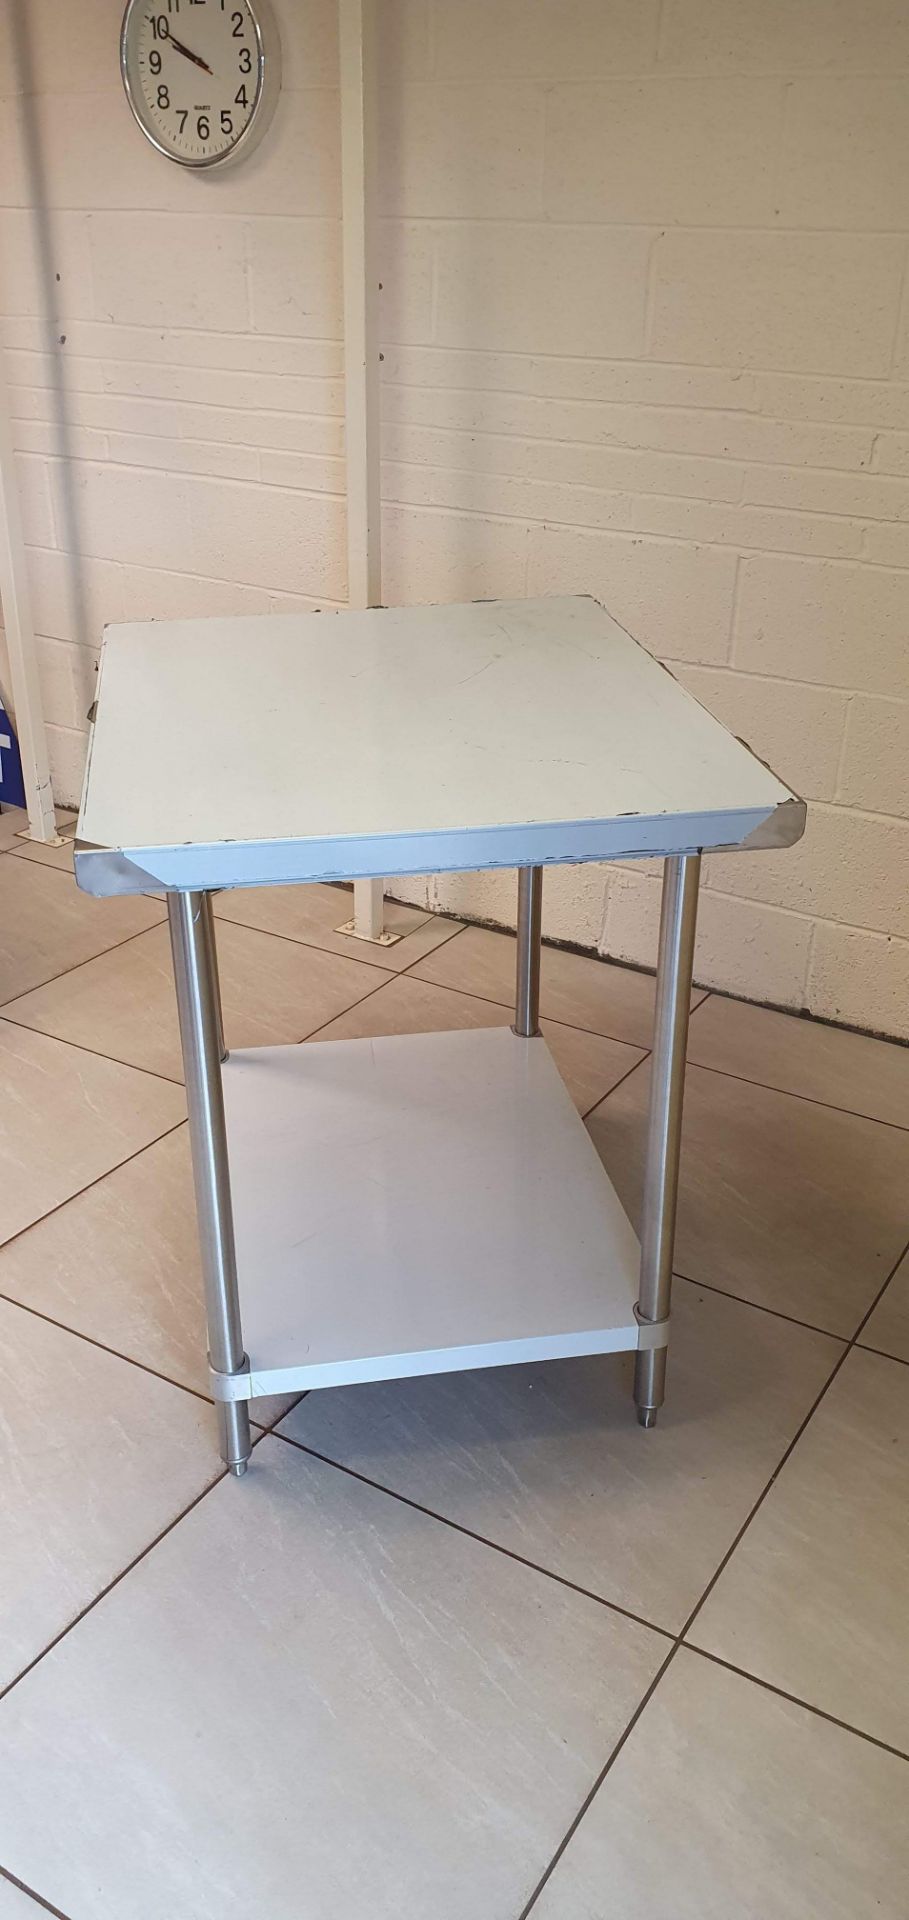 Stainless Steel Table - Heavy duty - Image 2 of 2